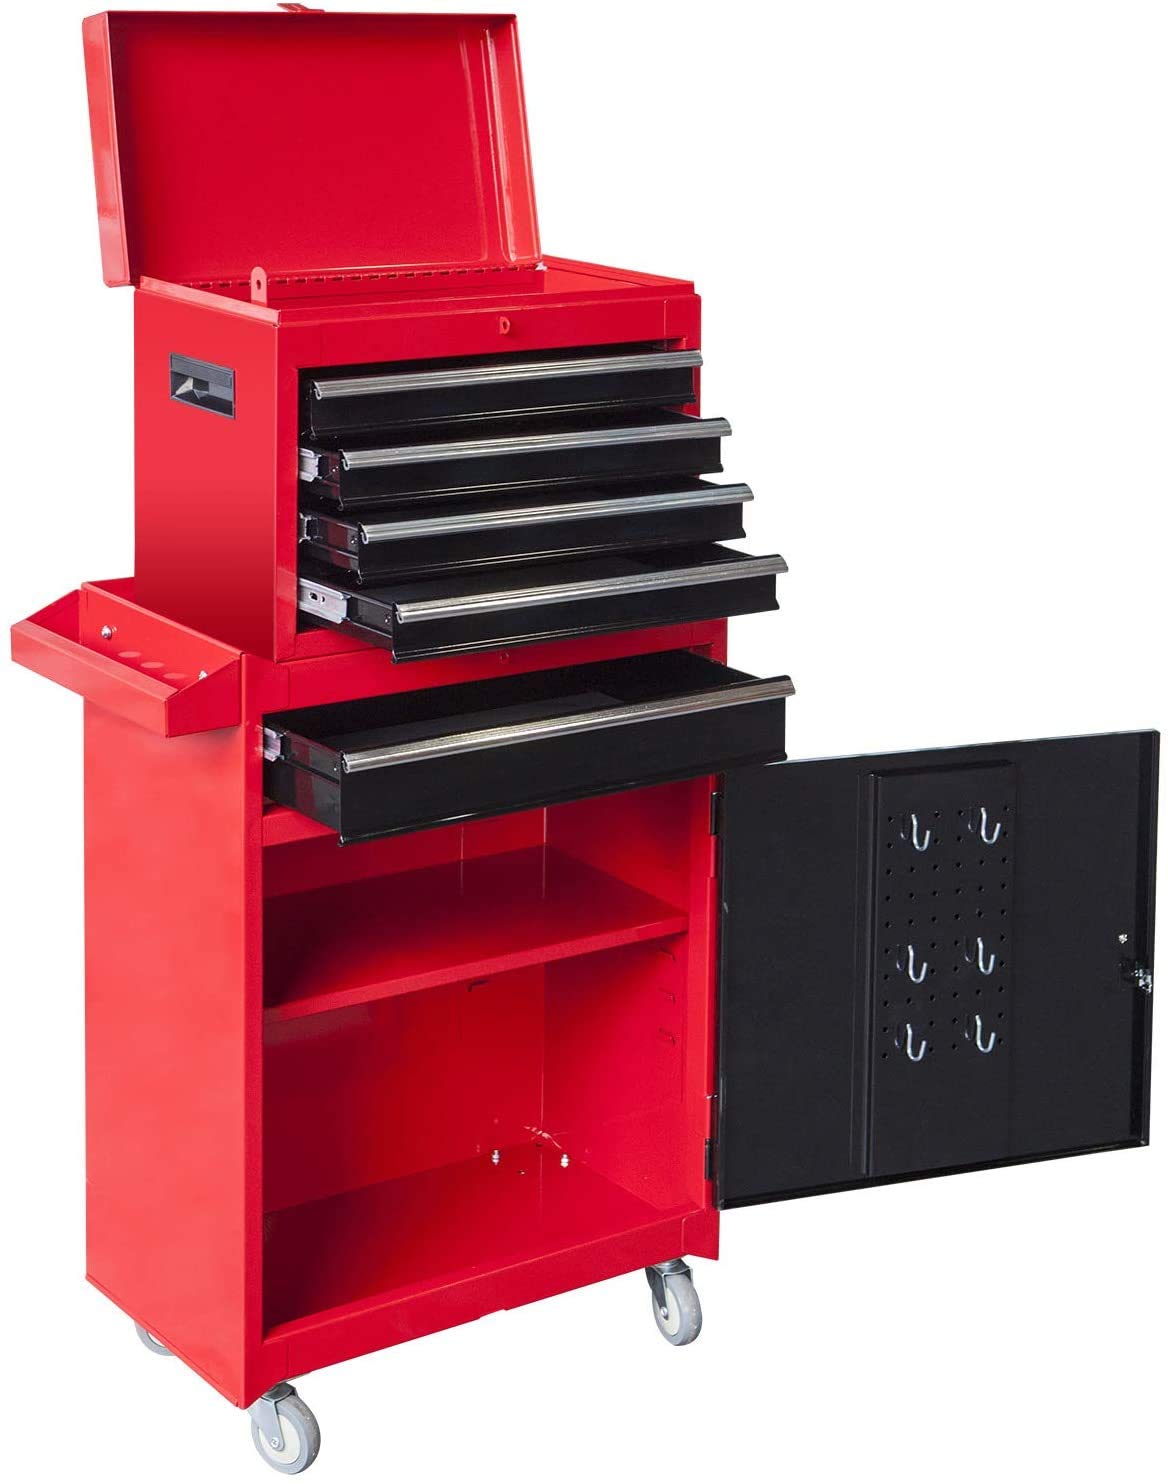 BIG RED ATBT1204R-RB Torin Rolling Garage Workshop Tool Organizer: Detachable 4 Drawer Tool Chest with Large Storage Cabinet and Adjustable Shelf,